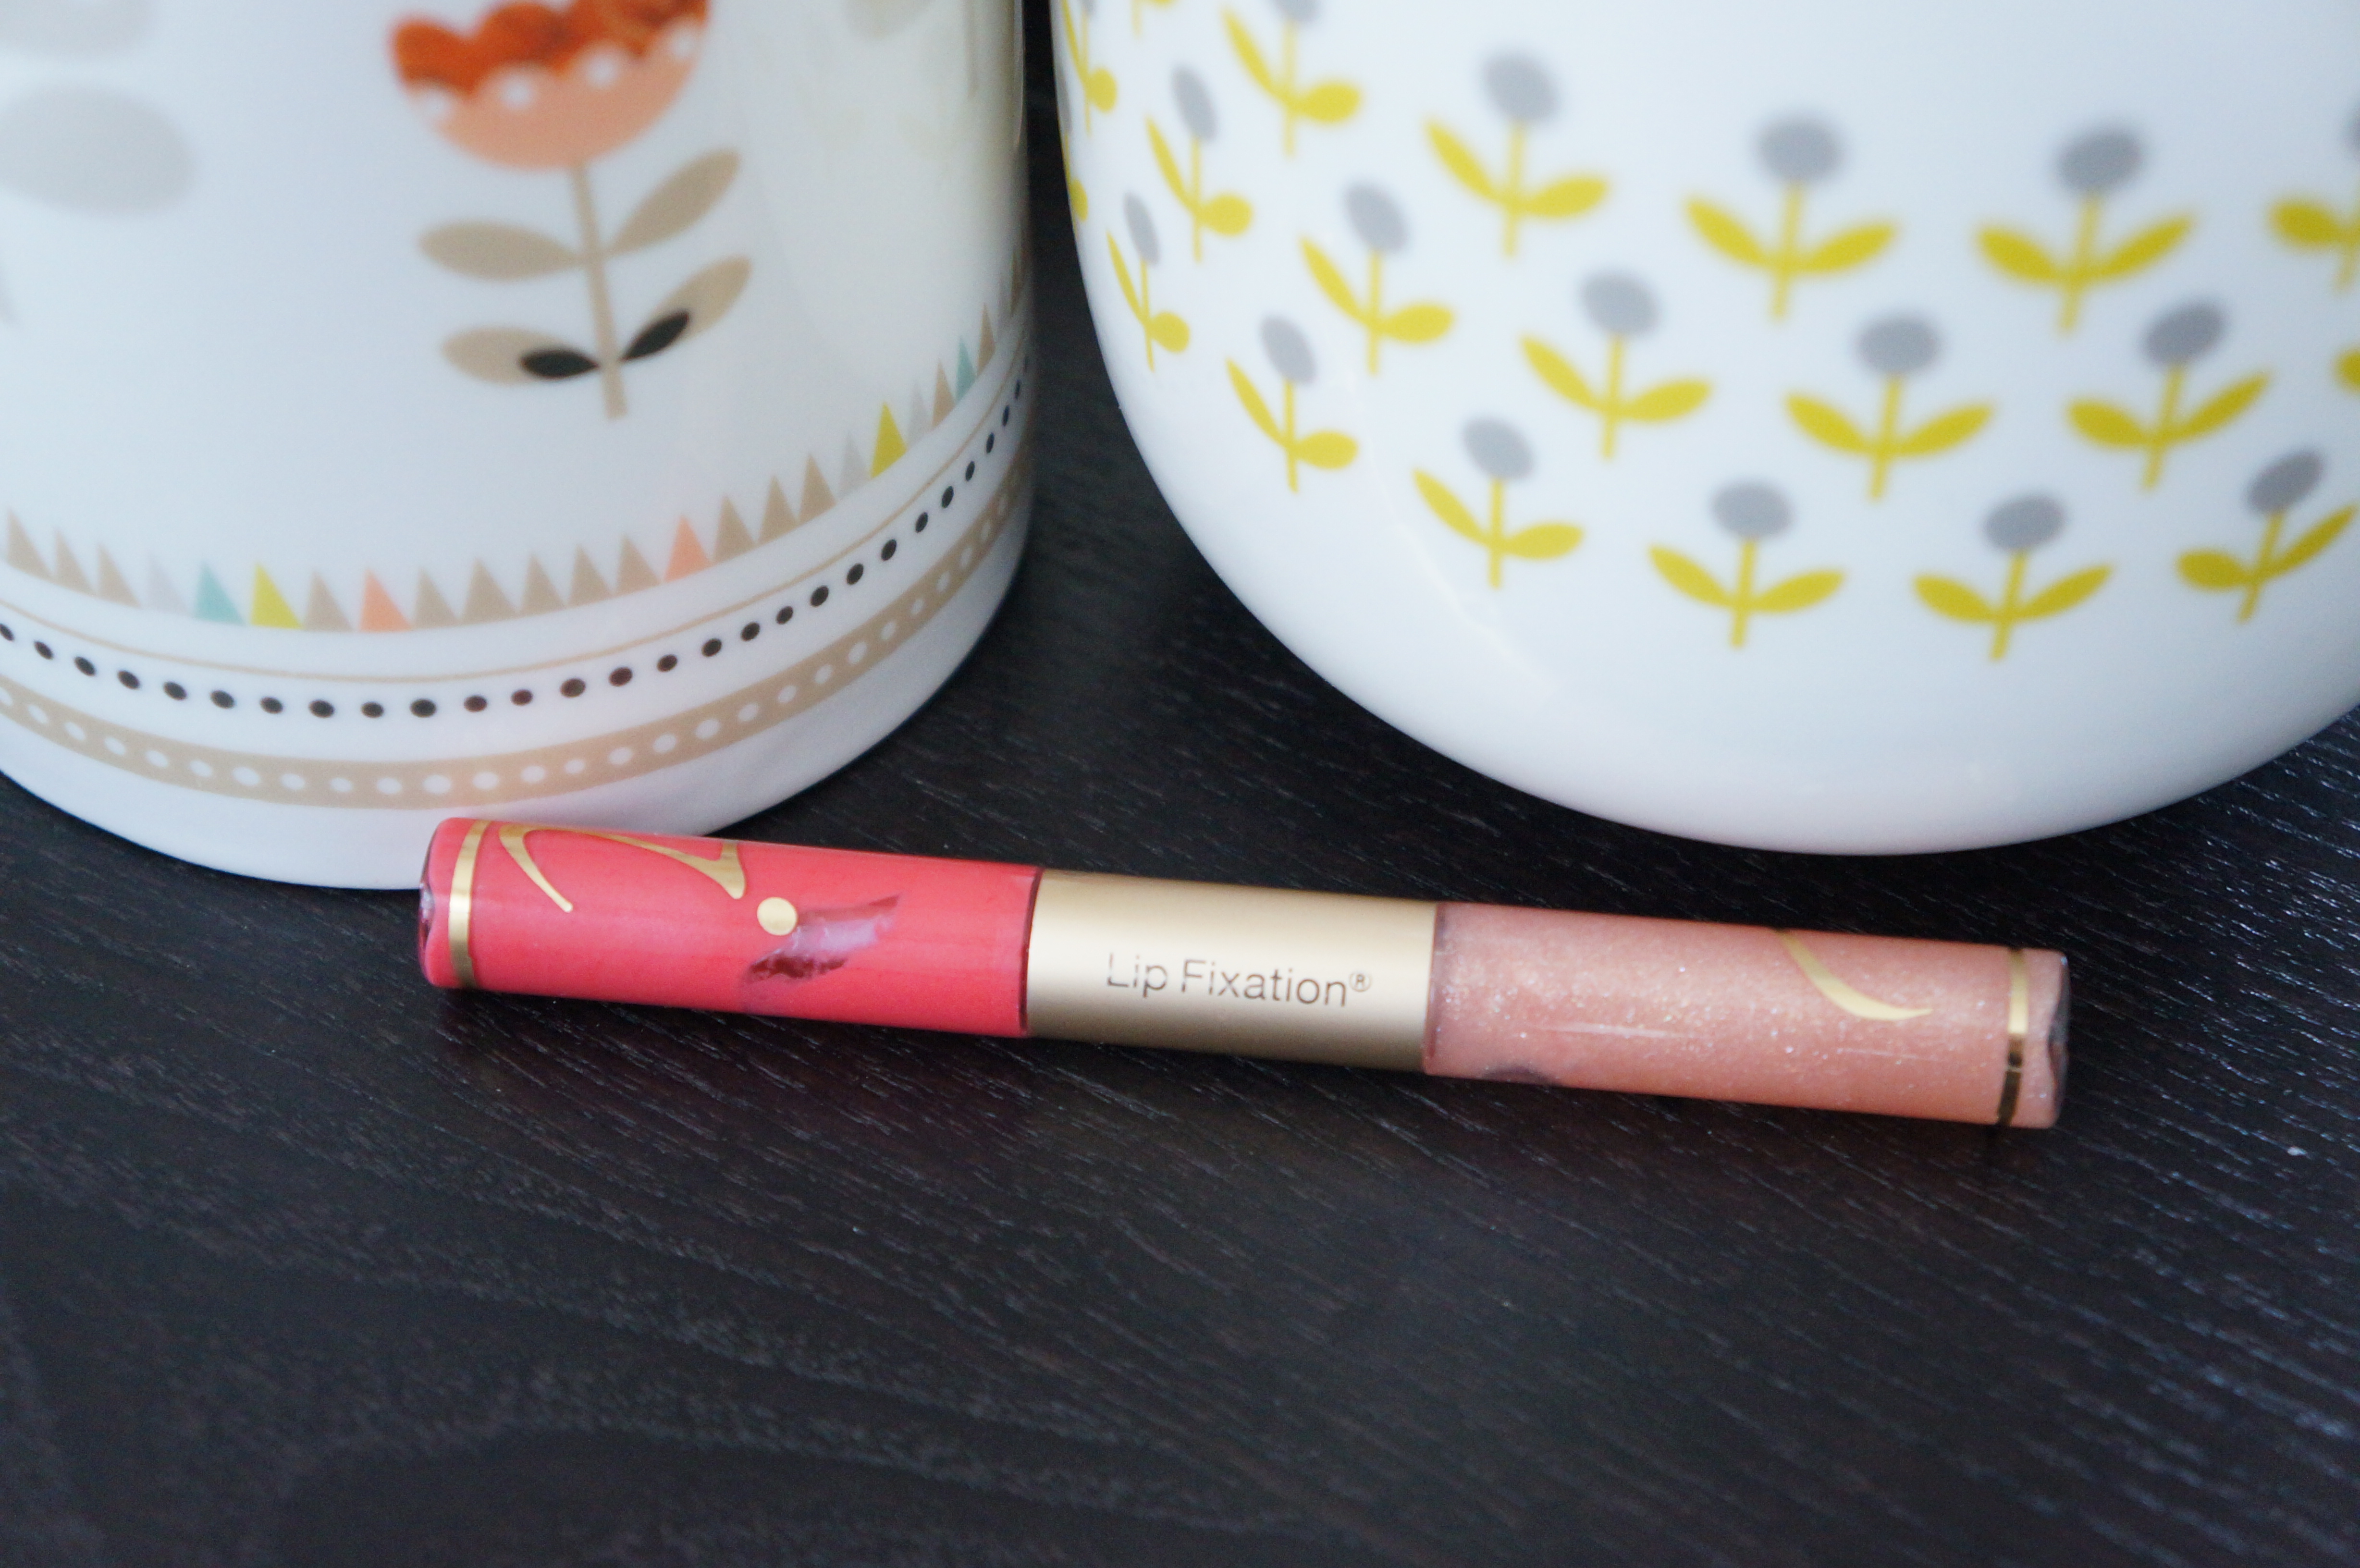 Lip Fixation by Jane Iredale in Craze/ Pic by kiwikoo.